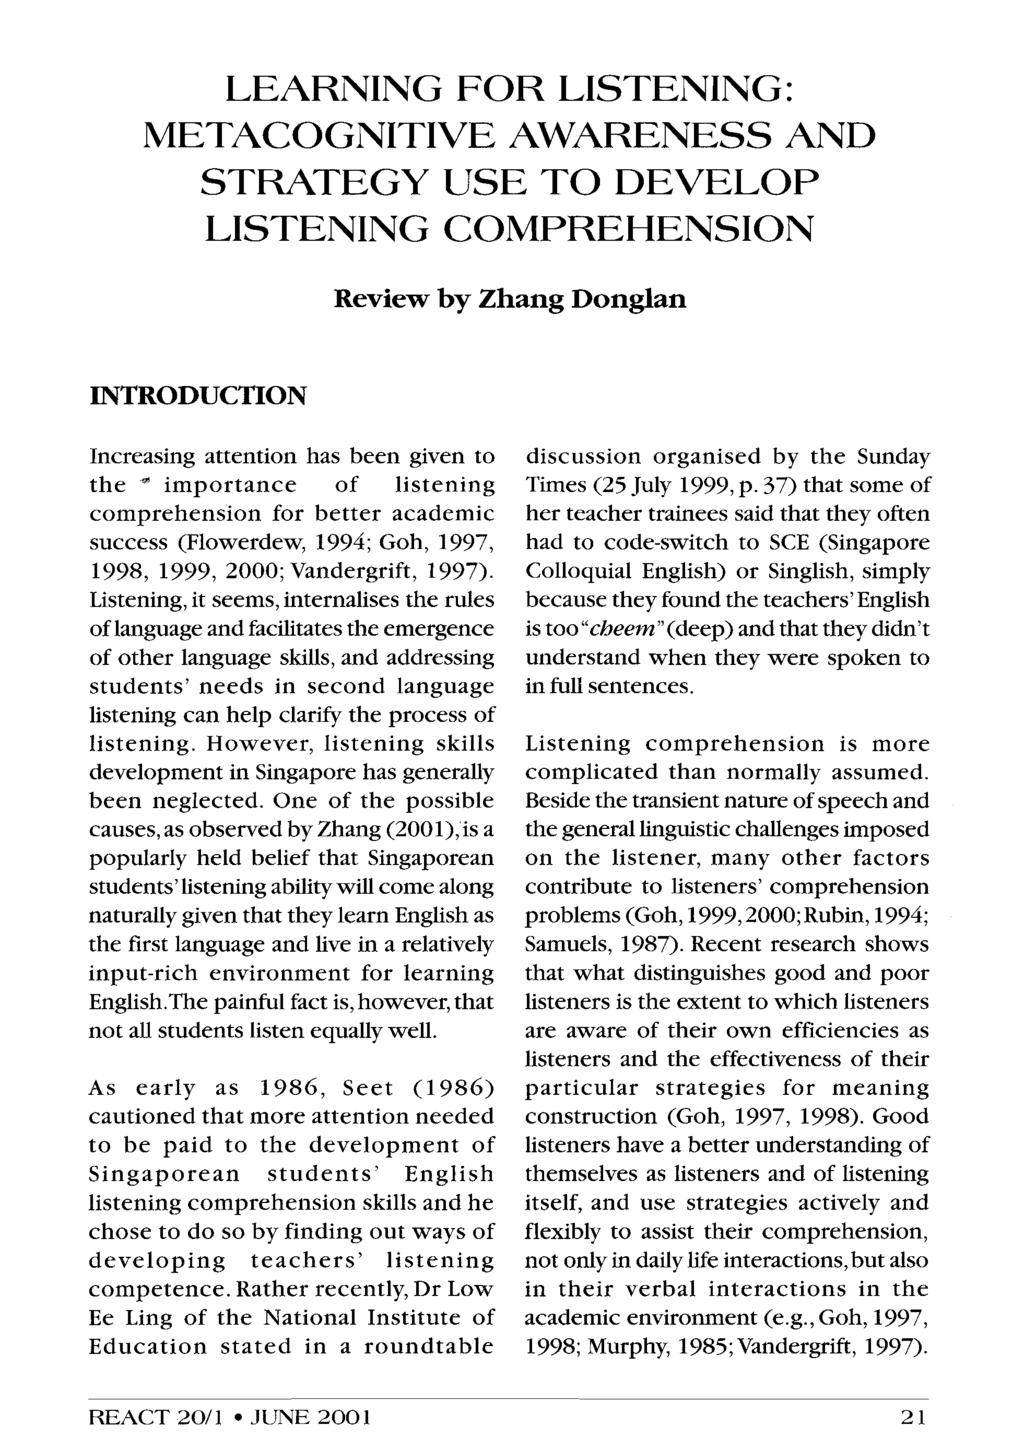 LEARNING FOR LISTENING: METACOGNITIVE AWARENESS AND STRATEGYUSETODEVELOP LISTENING COMPREHENSION Review by Zhang Donglan INTRODUCTION Increasing attention has been given to the " importance of